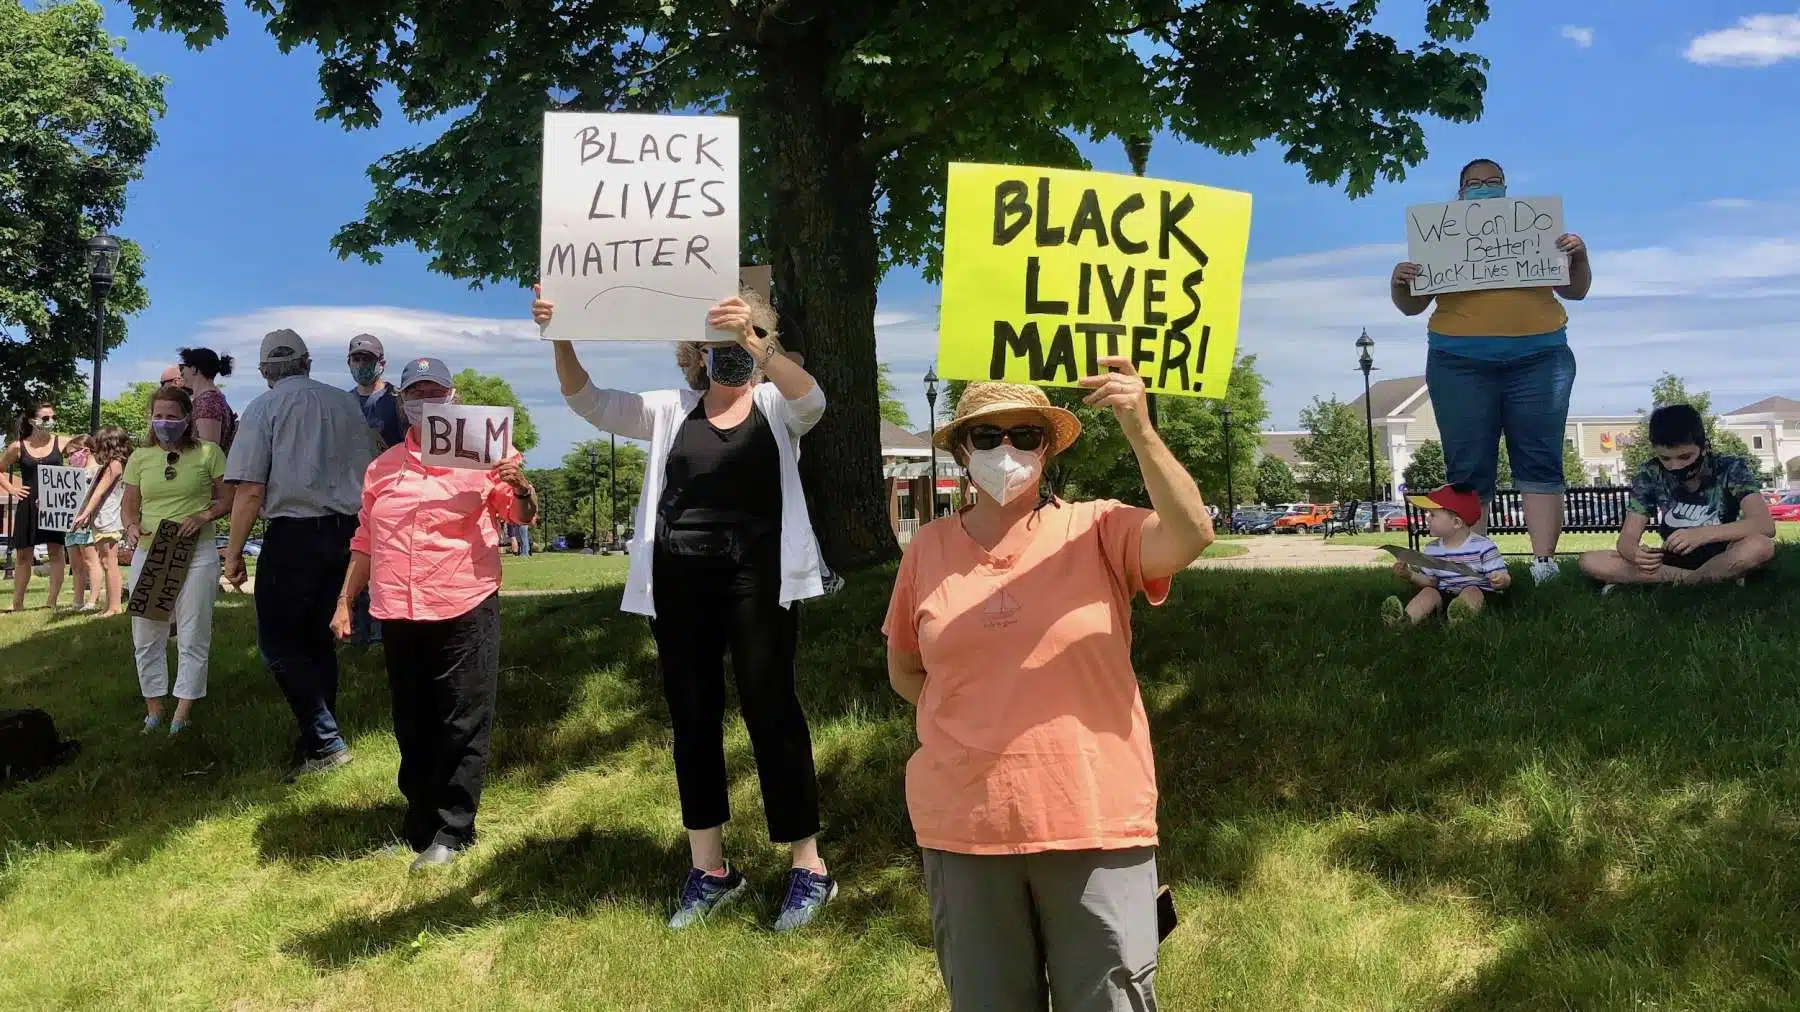 Rhode Island News: A second rally to support Black lives in North Kingstown